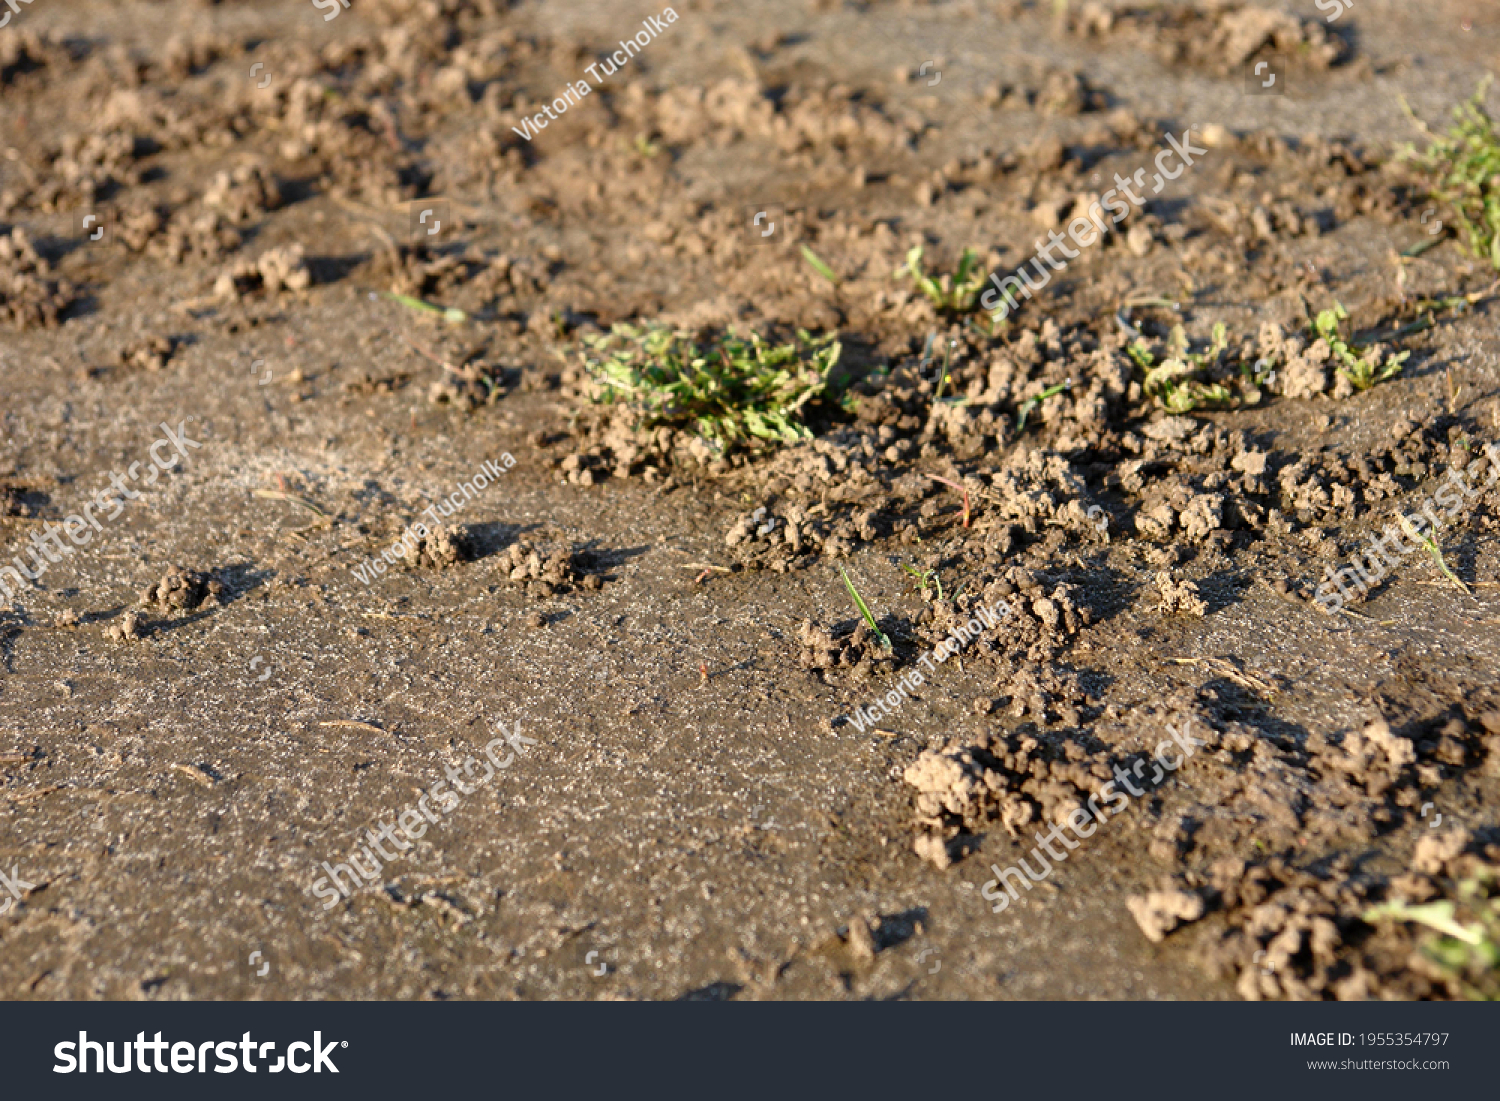 Close up of the ground with small clods forming mounds of sands caused by the activity of invertebrates in the ground. Poland, Europe                #1955354797